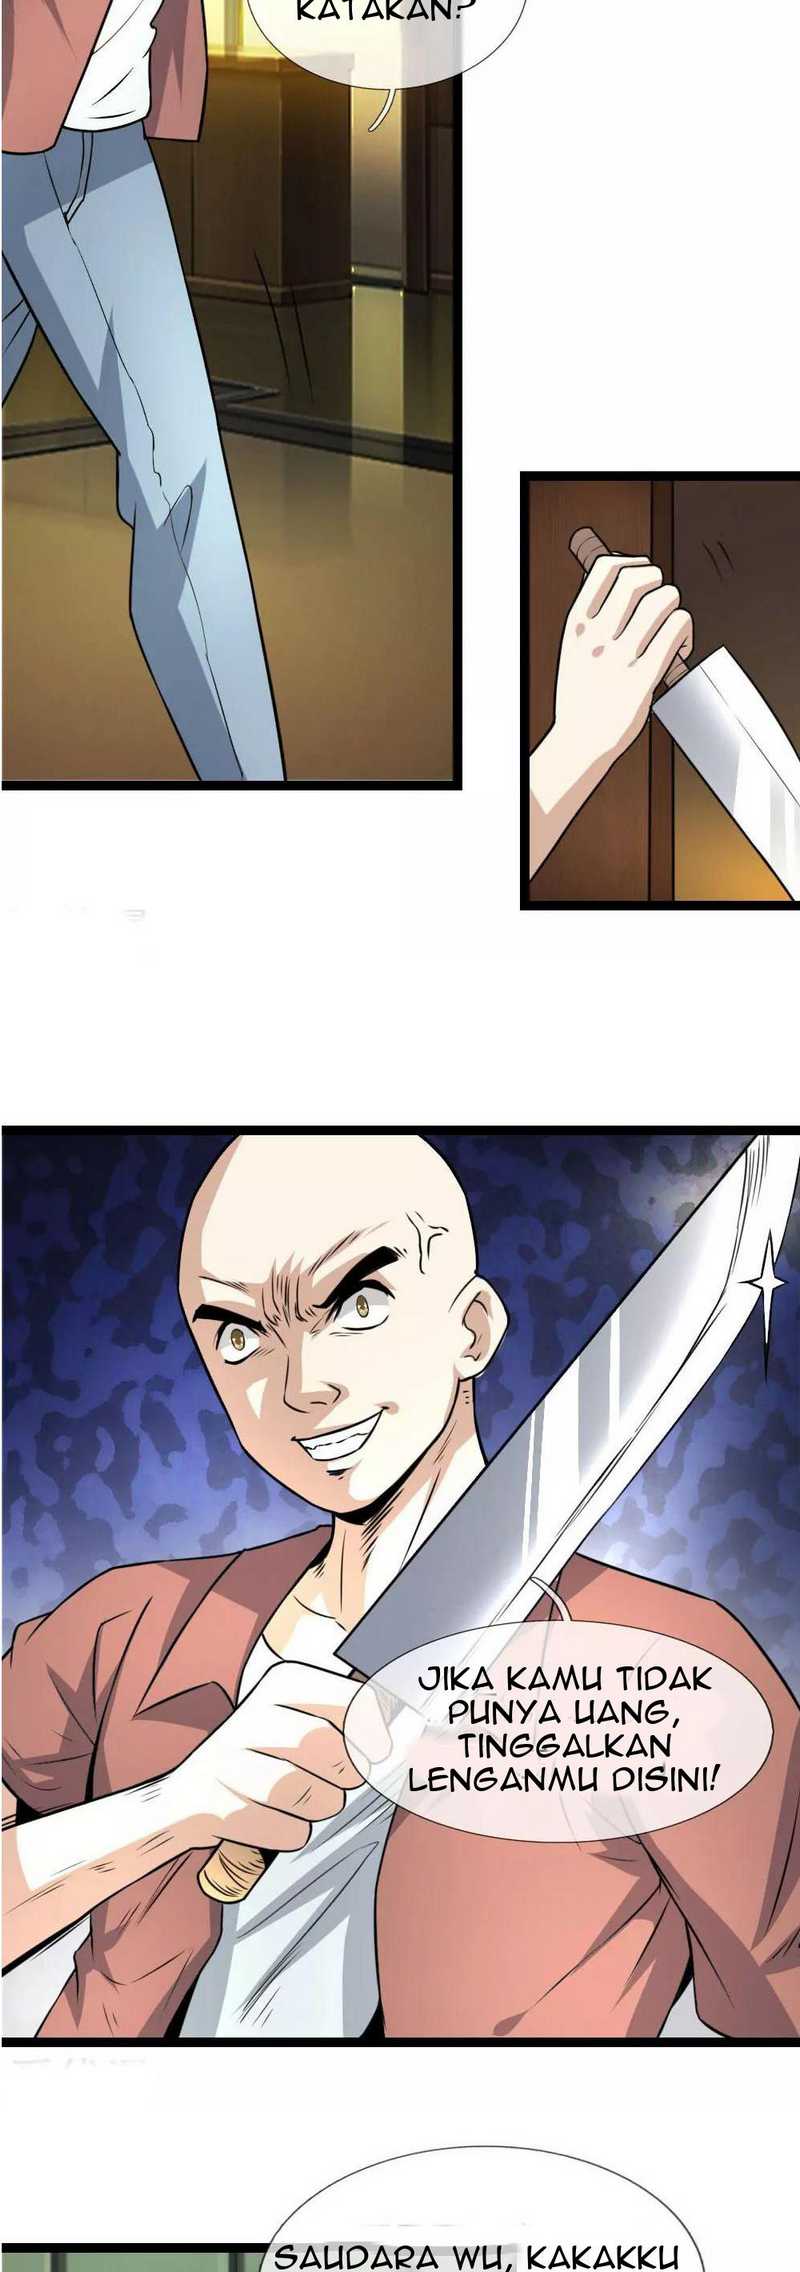 The Master of Knife Chapter 58